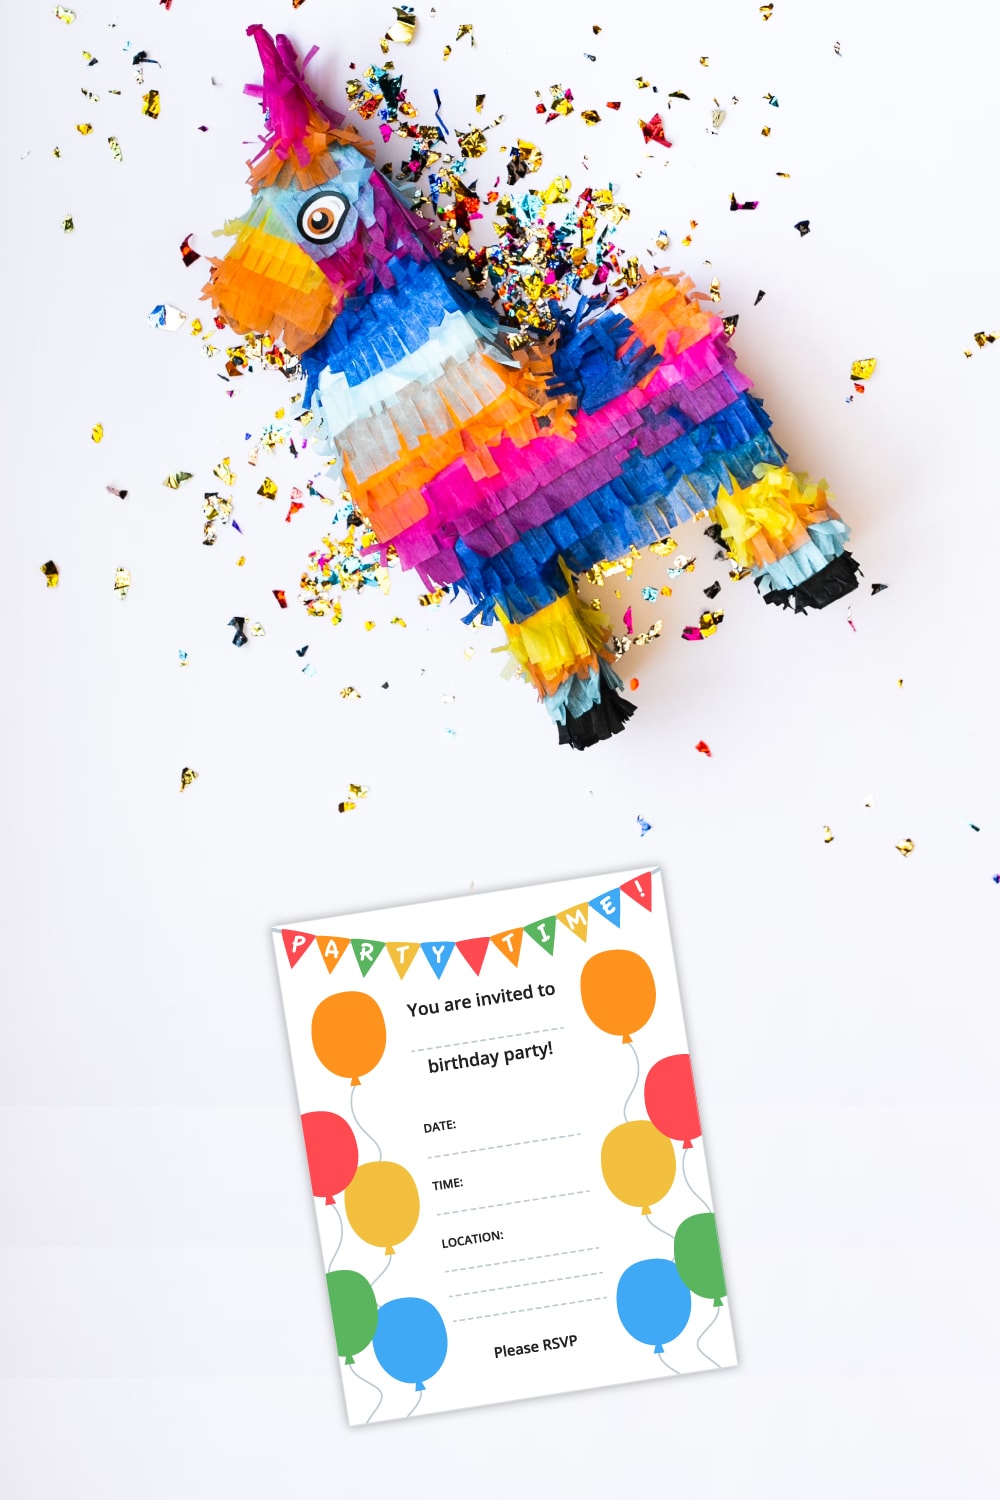 Preview of birthday party invite with colorful llama piñata on top half with shiny confetti scattered. 